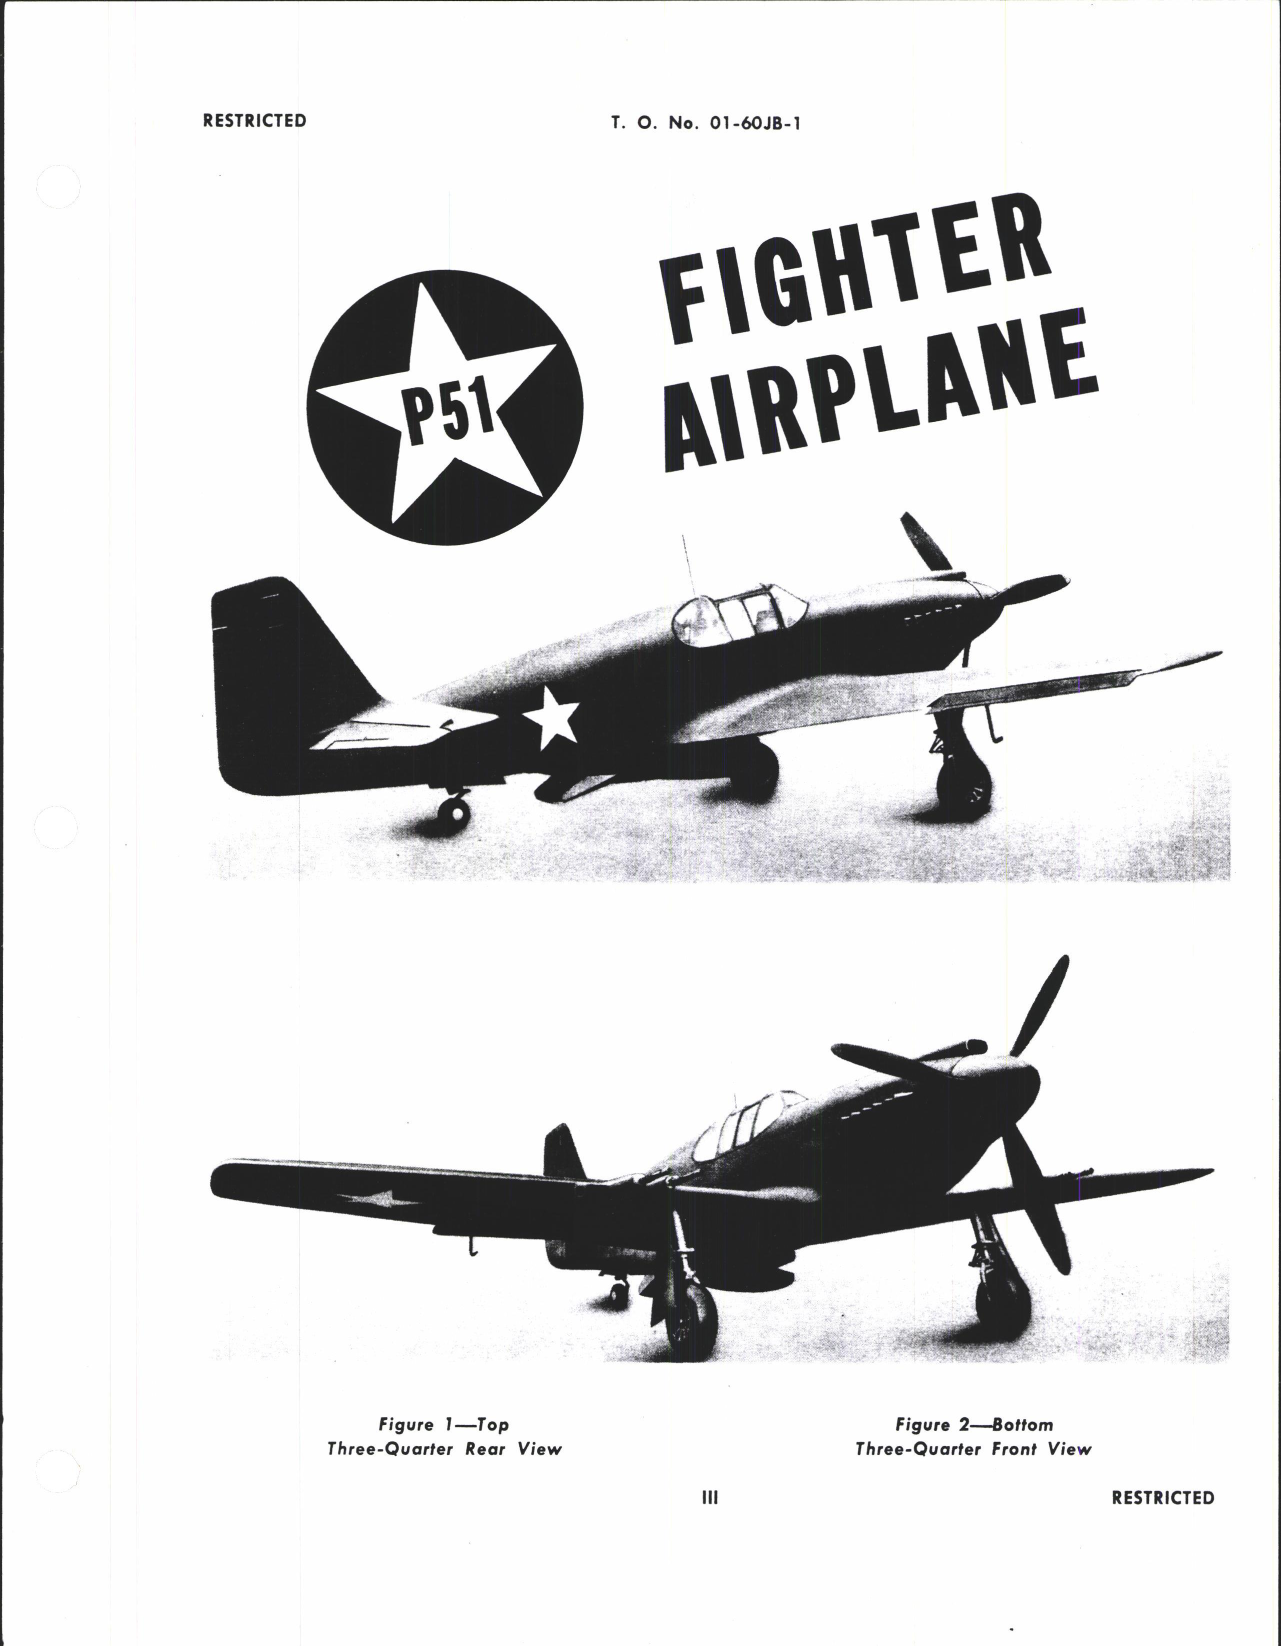 Sample page 5 from AirCorps Library document: Pilot's Handbook of Flight Operating Instructions for P-51 Airplane